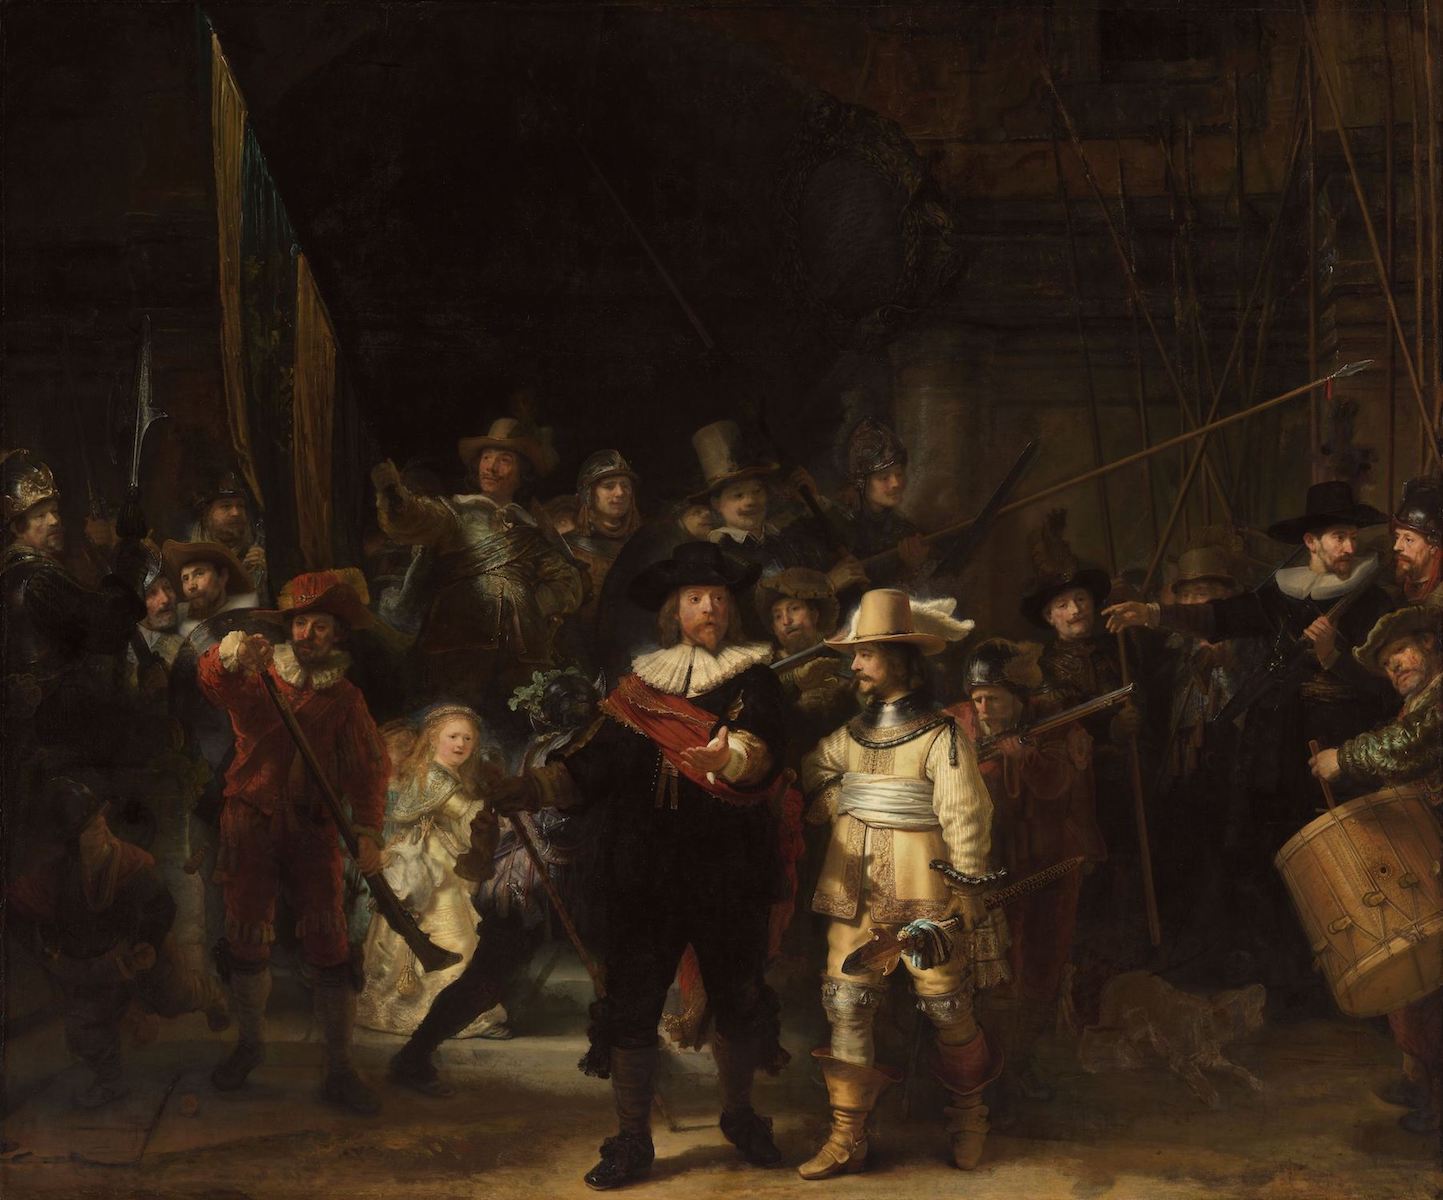 Rembrandt van Rijn: The Night Watch, 1642, oil on canvas, 12 by 15 feet.